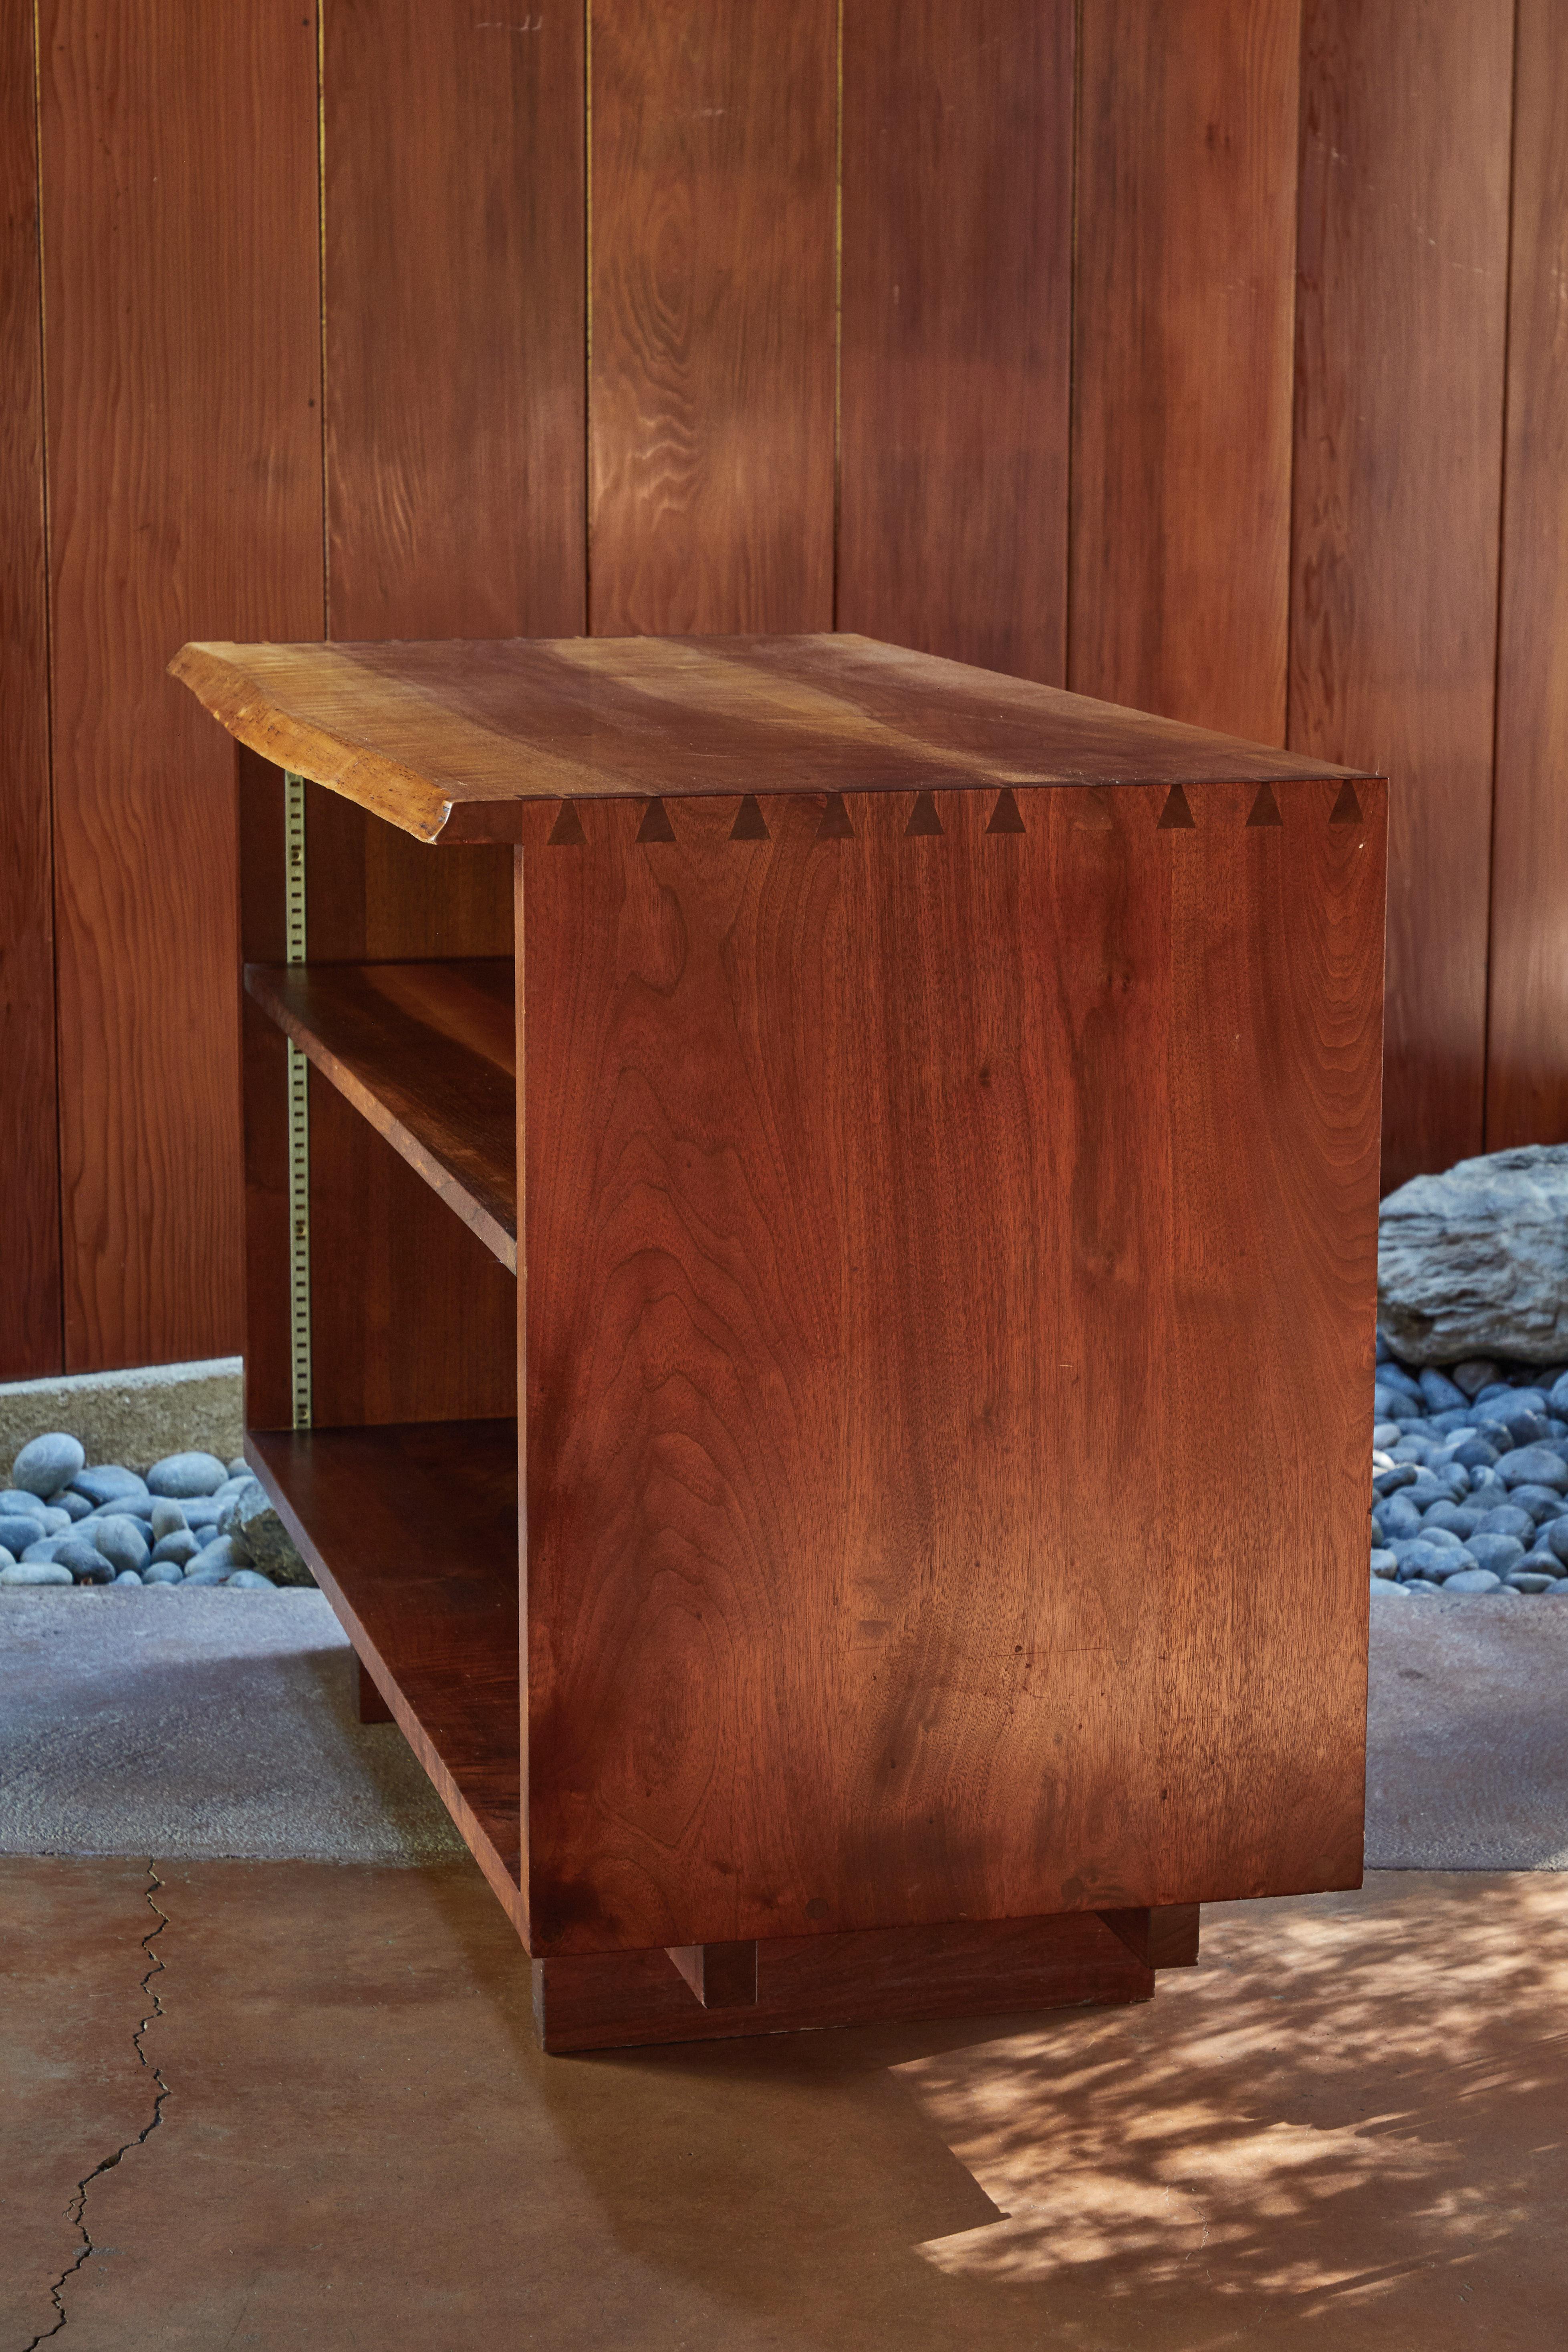 1959 George Nakashima open cabinet in Persian walnut. Executed in beautifully grained Persian walnut by George Nakashima at his legendary studio in New Hope, Pennsylvania. Signed #475 Kornblut. An exceptionally rare and highly refined example of the